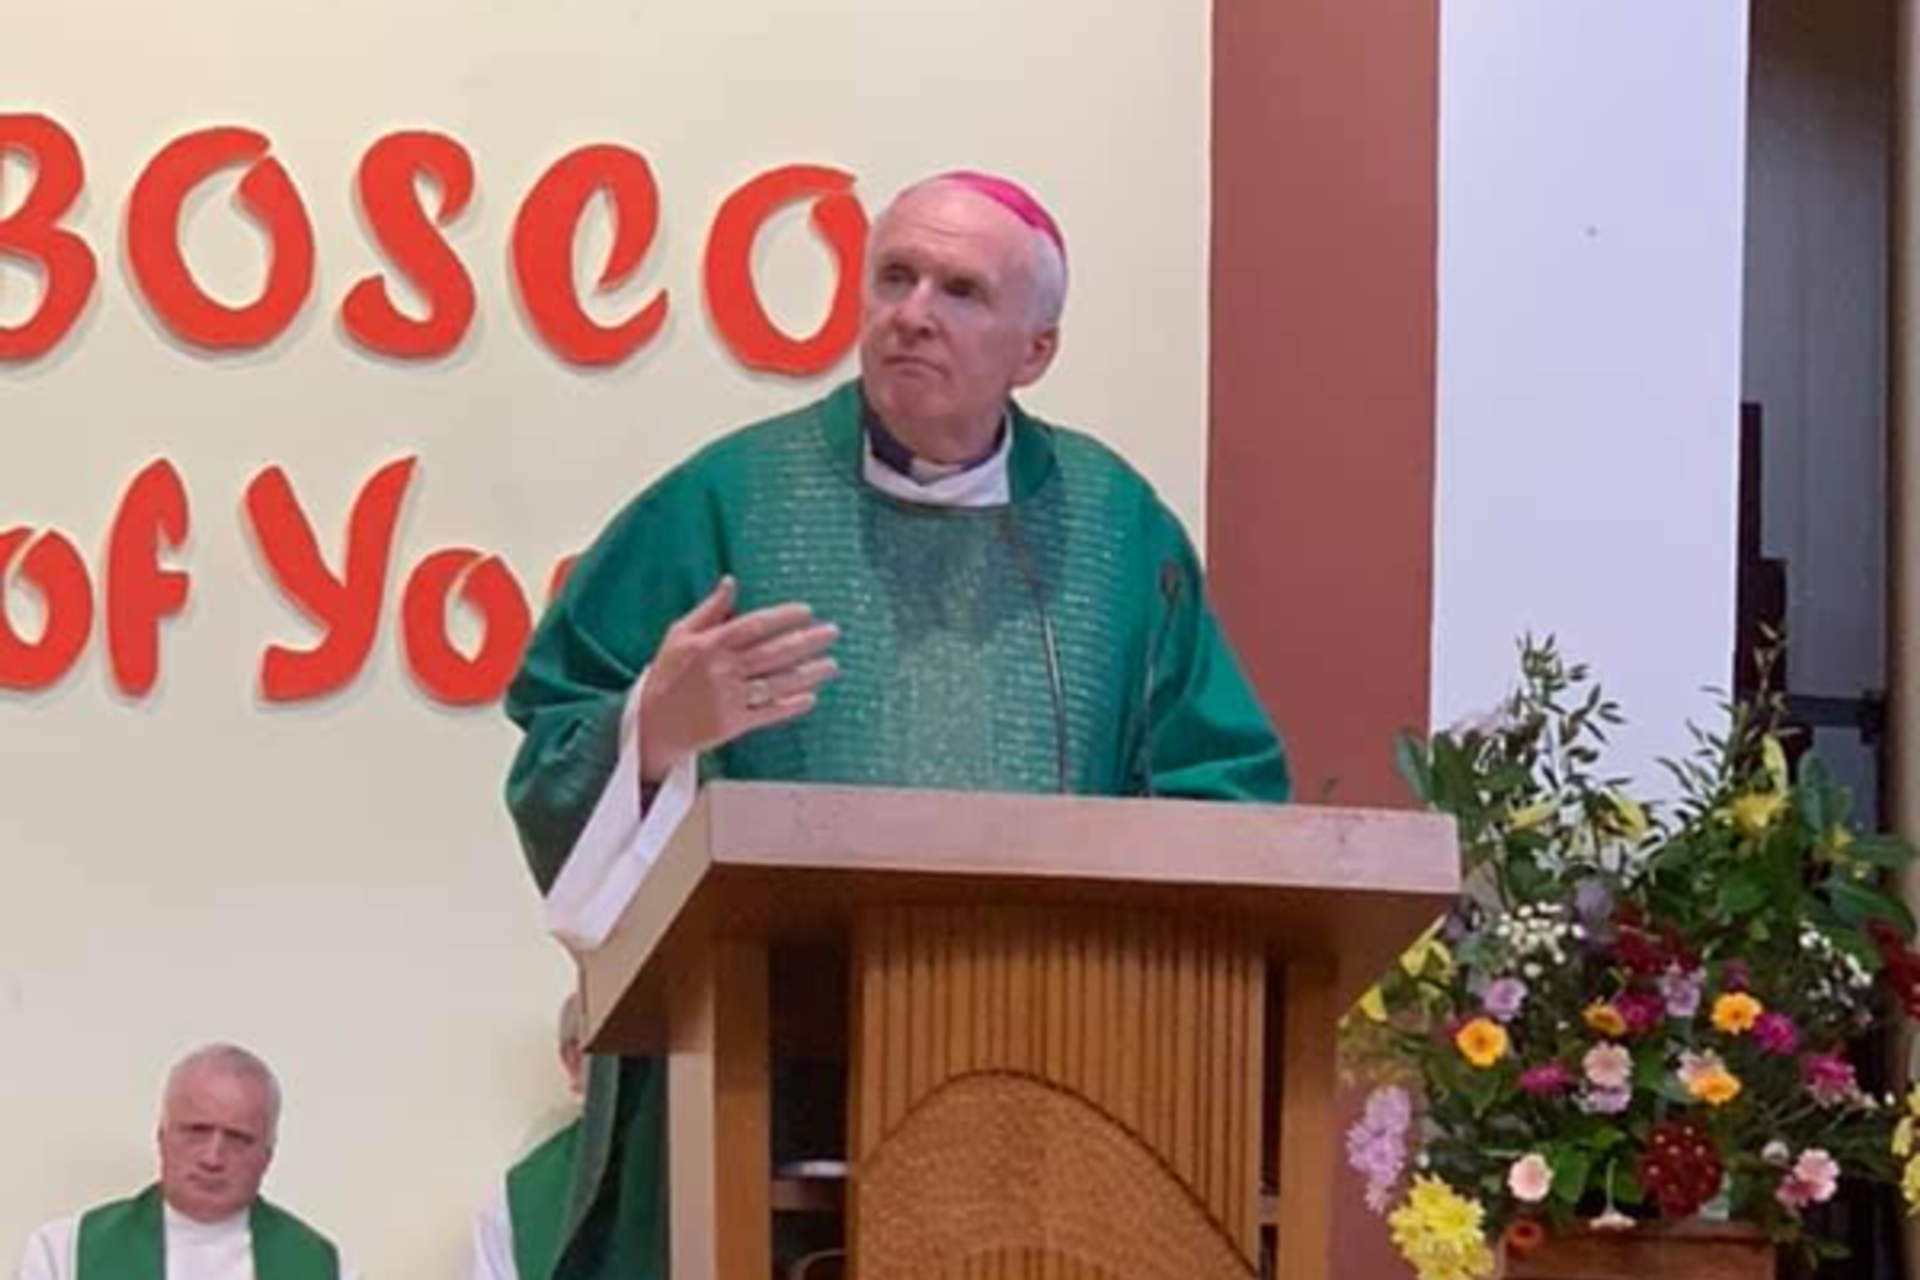 Racism has no place in Ireland – Bishop Leahy